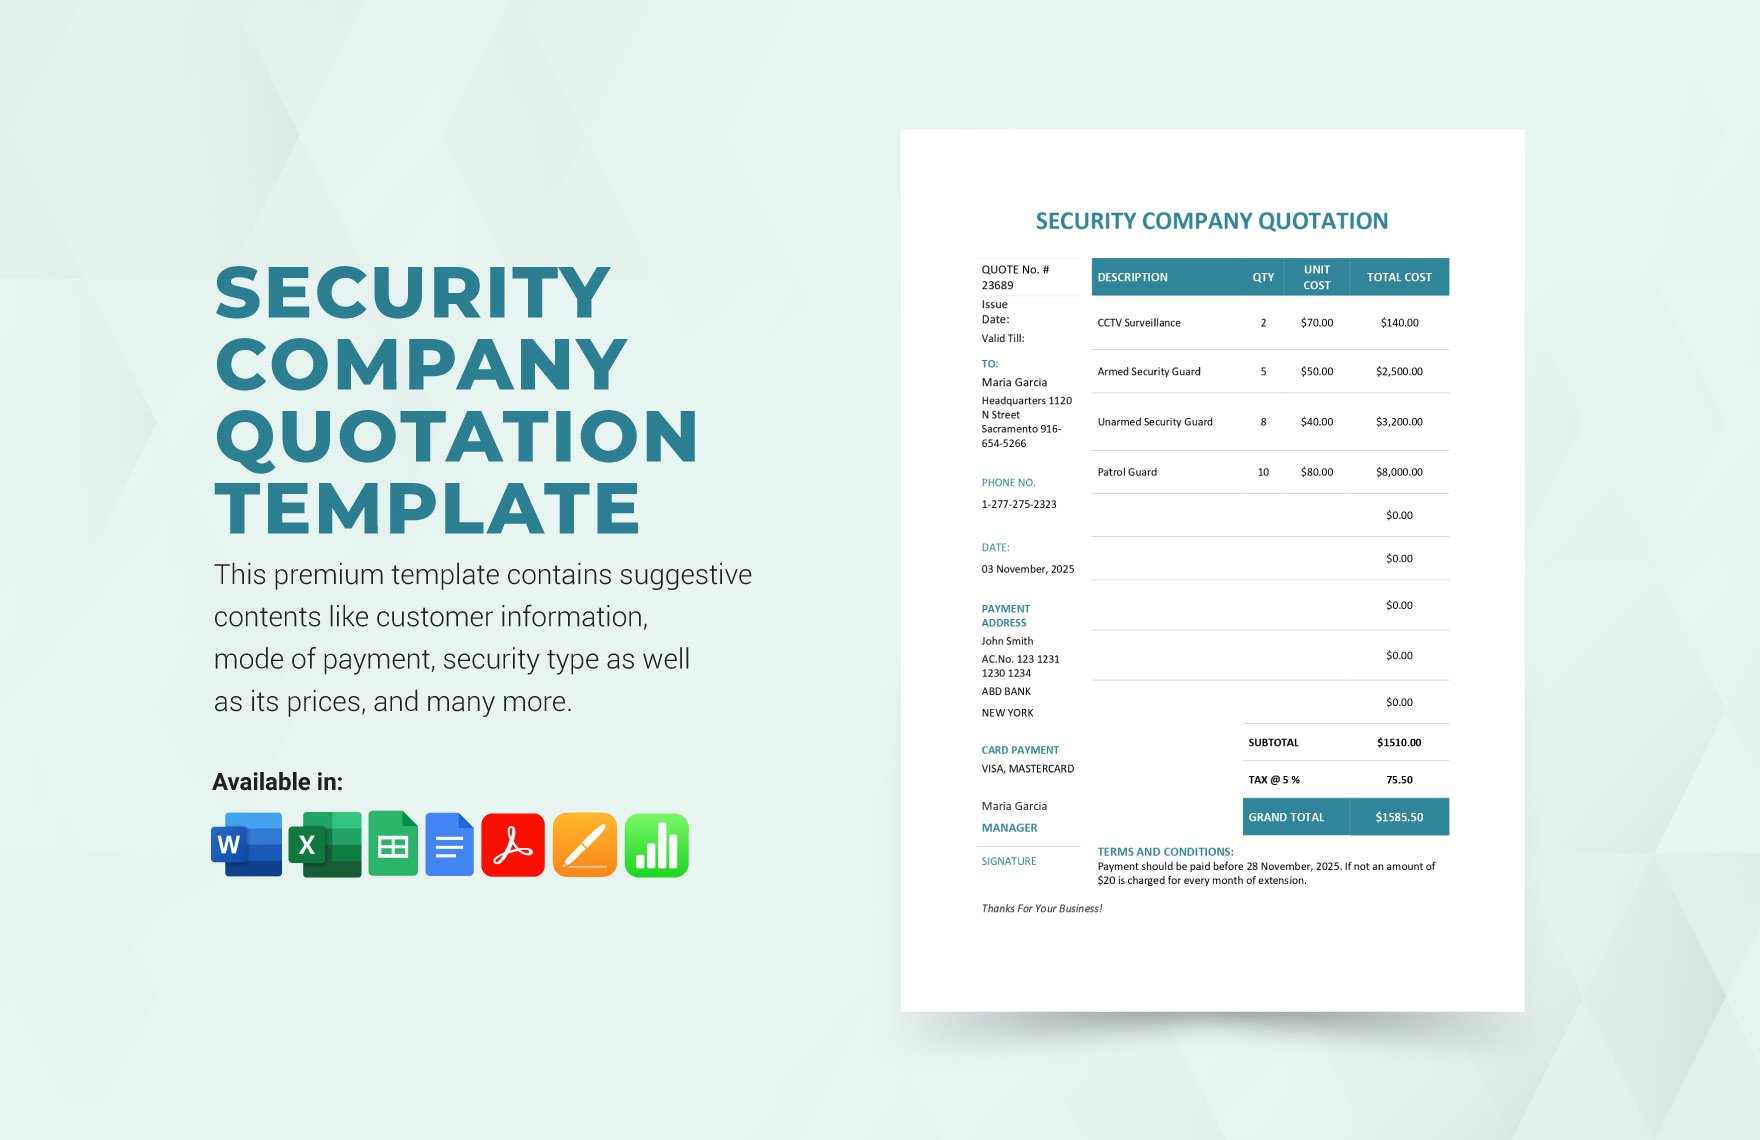 Security Company Quotation Template